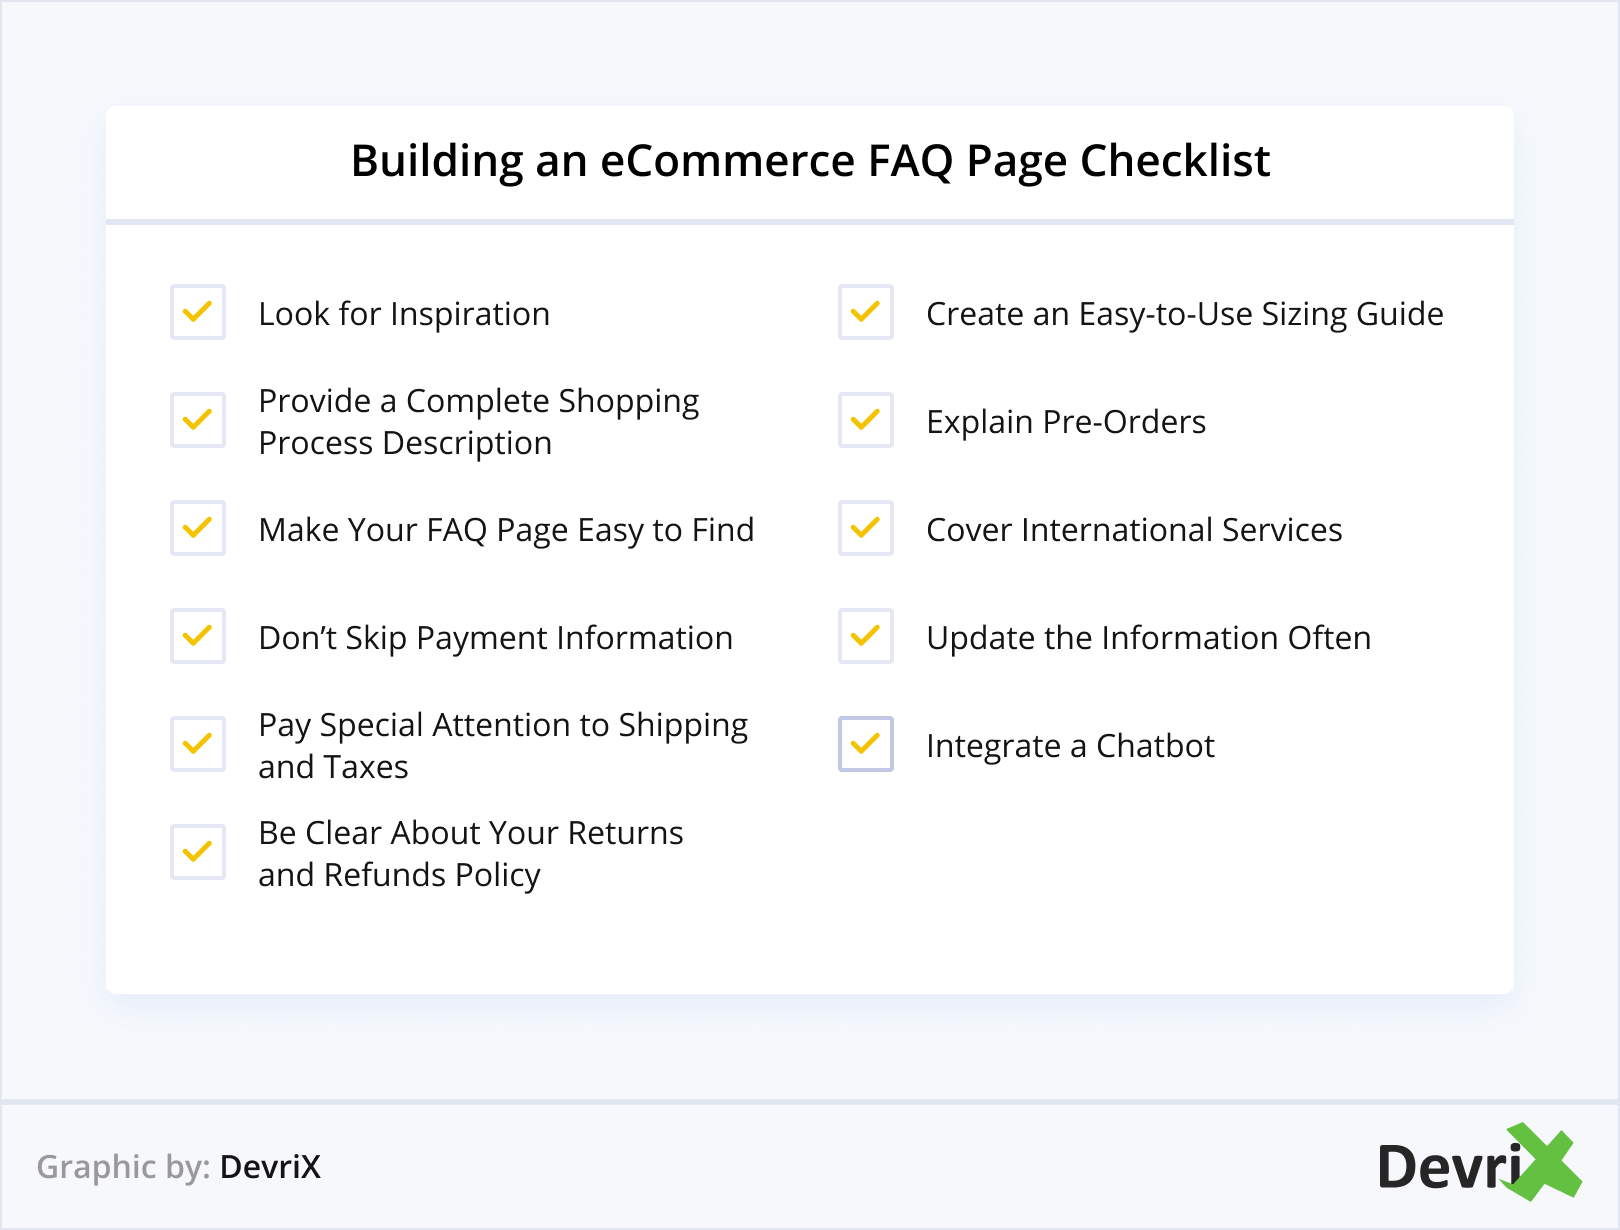 Building an eCommerce FAQ Page Checklist